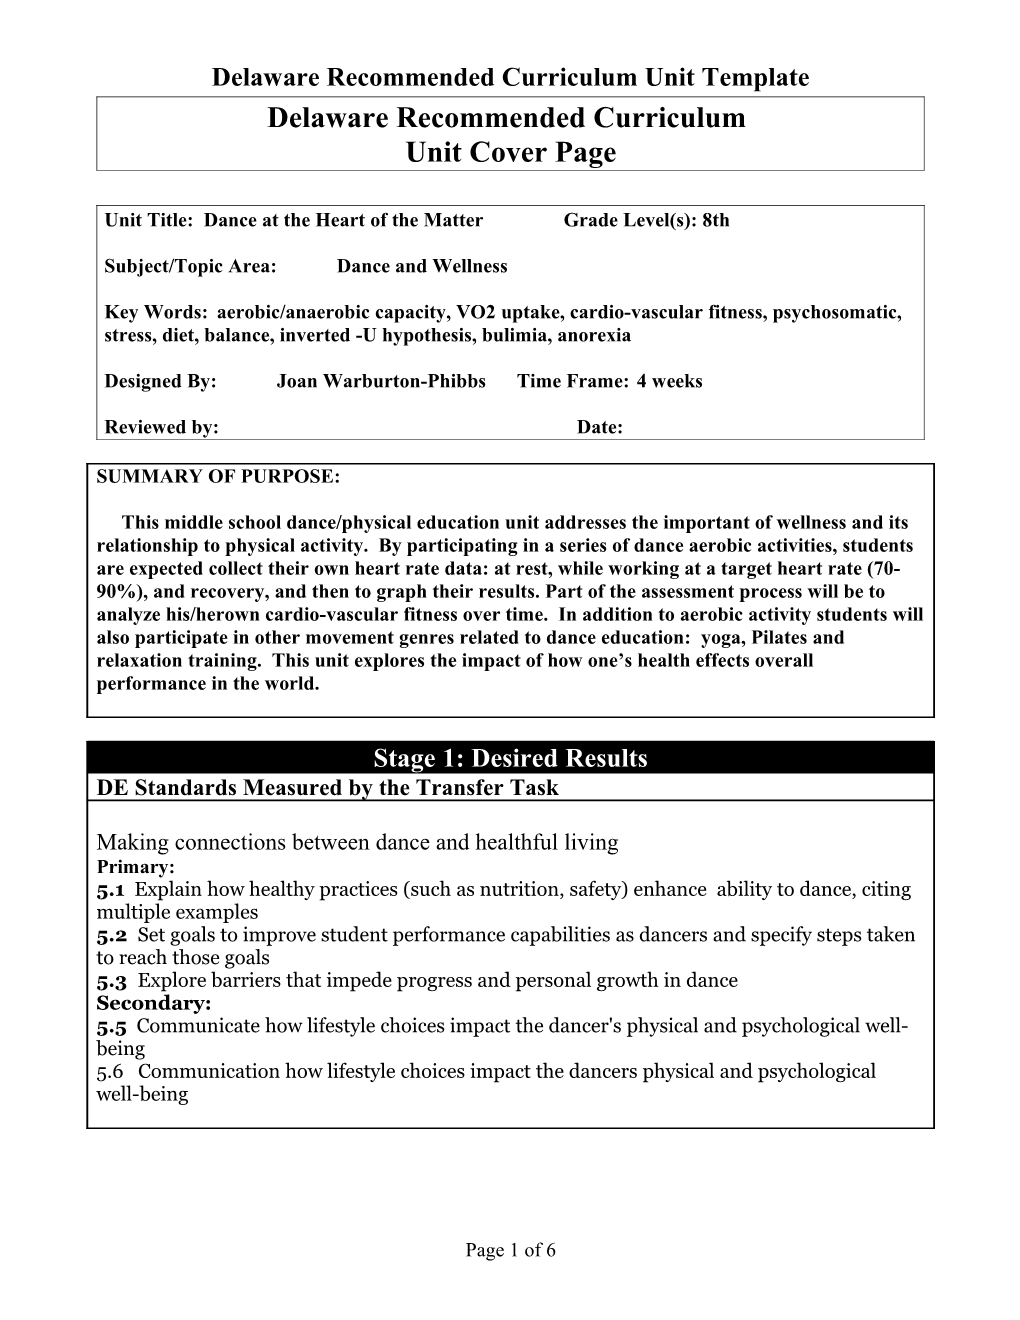 Delaware Recommended Curriculum Unit Template